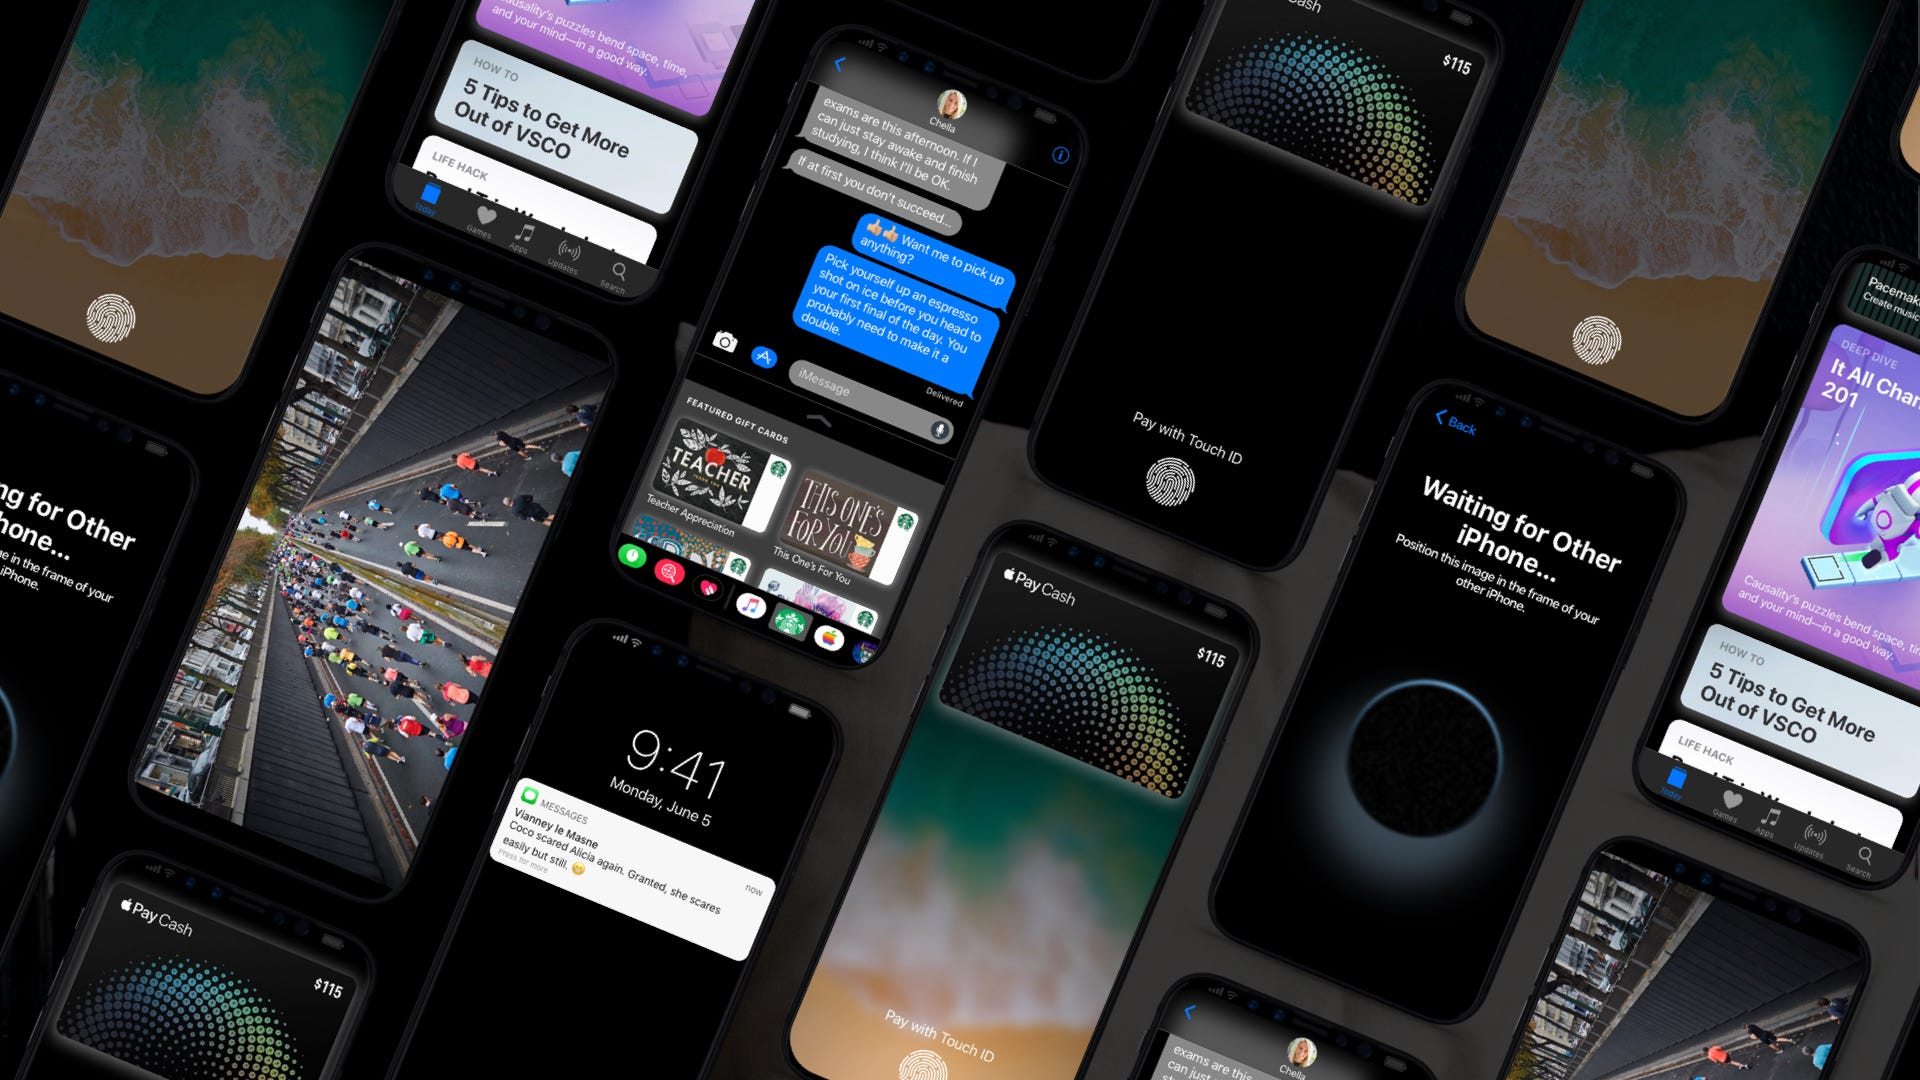 Smart Invert (or Dark Mode), Home button and video on iPhone 8 with iOS 11  — Concept | by Vianney le Masne | Medium